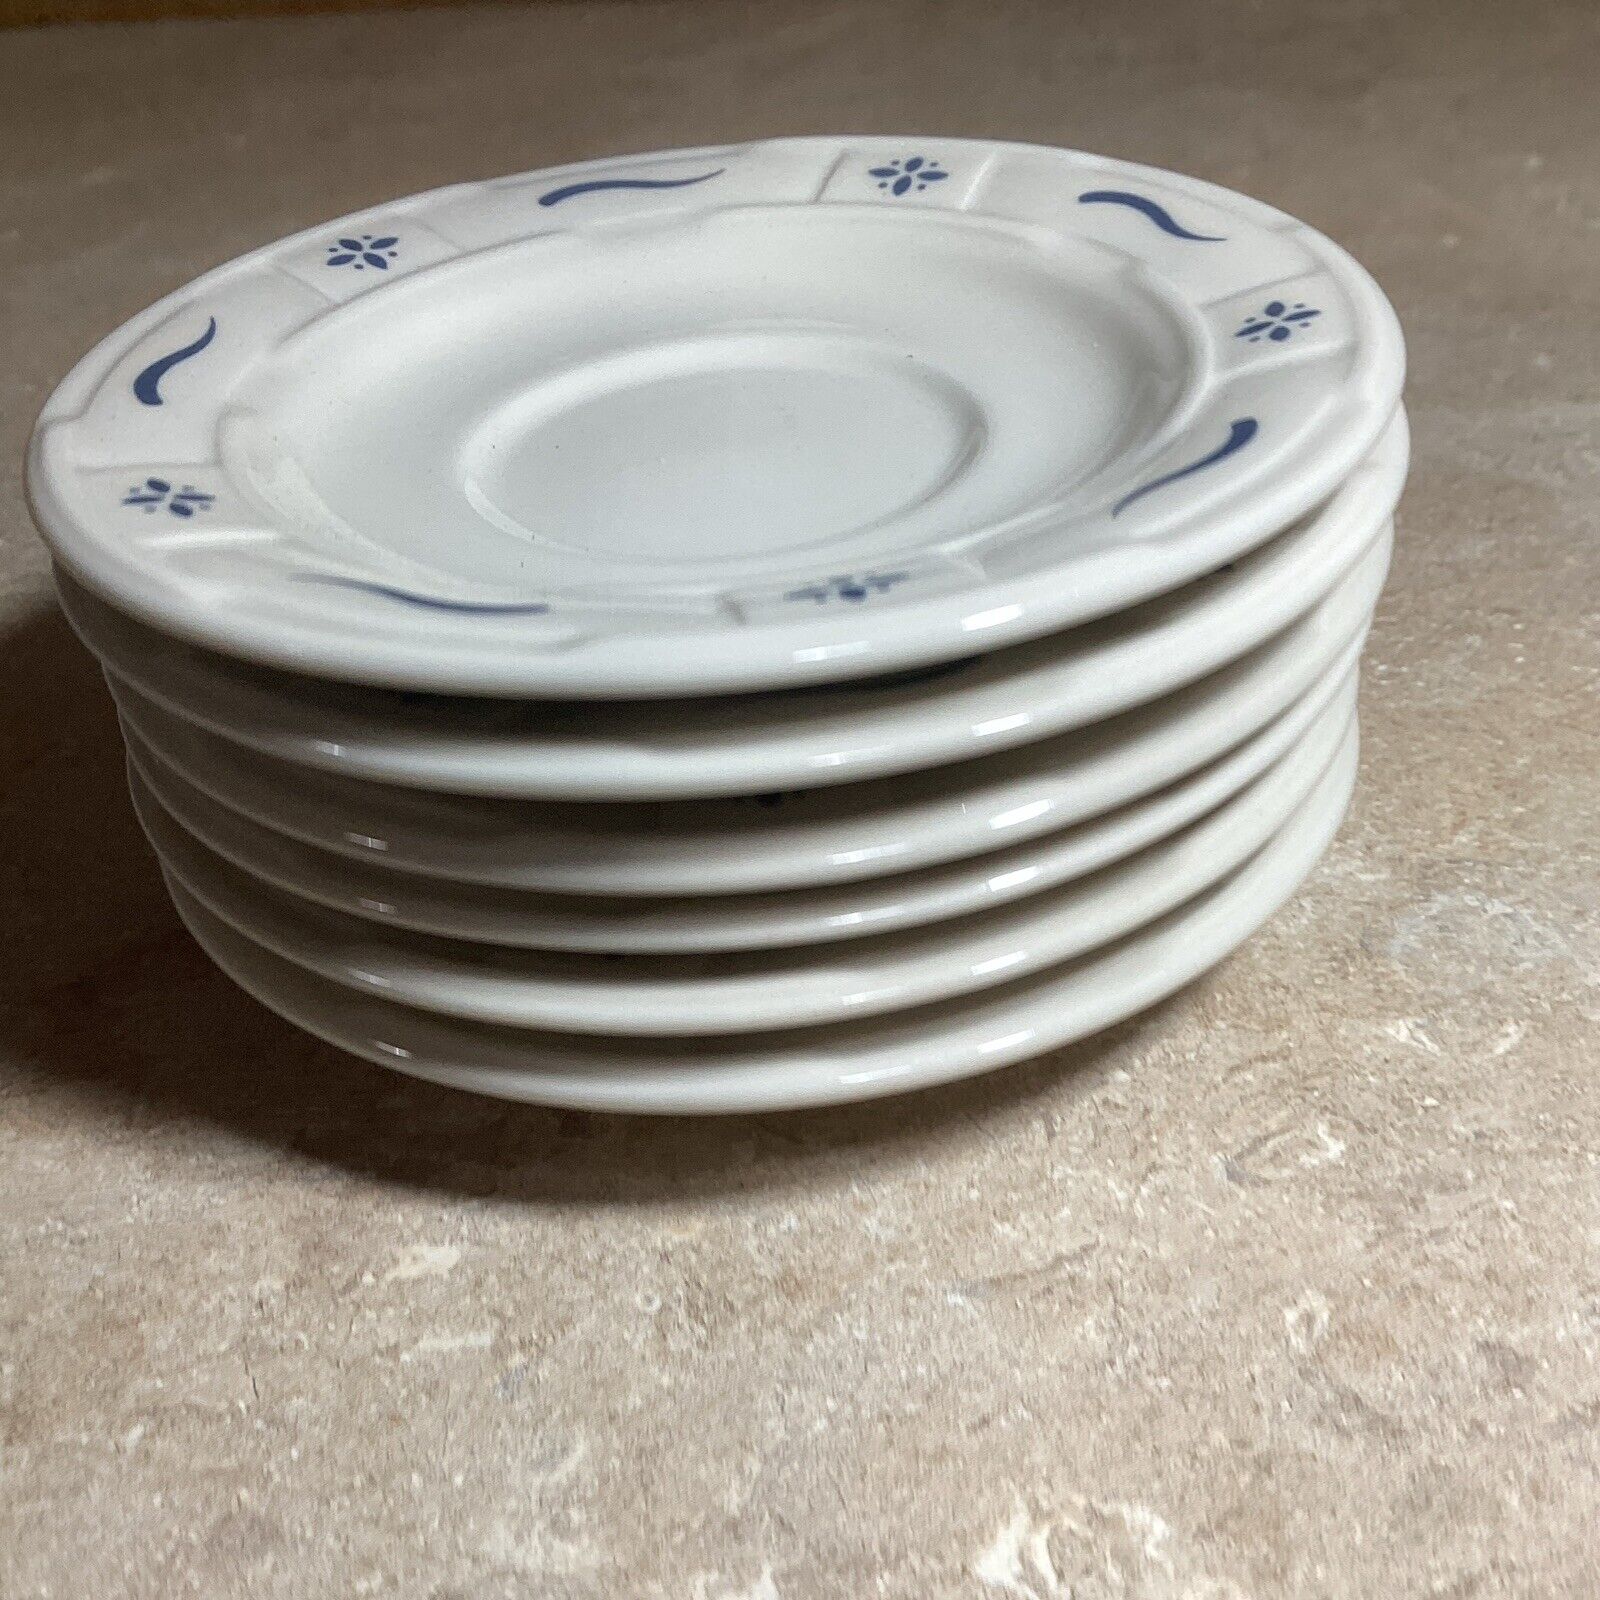 Longaberger Pottery Blue Woven Traditions 6” Saucers Set Of 6